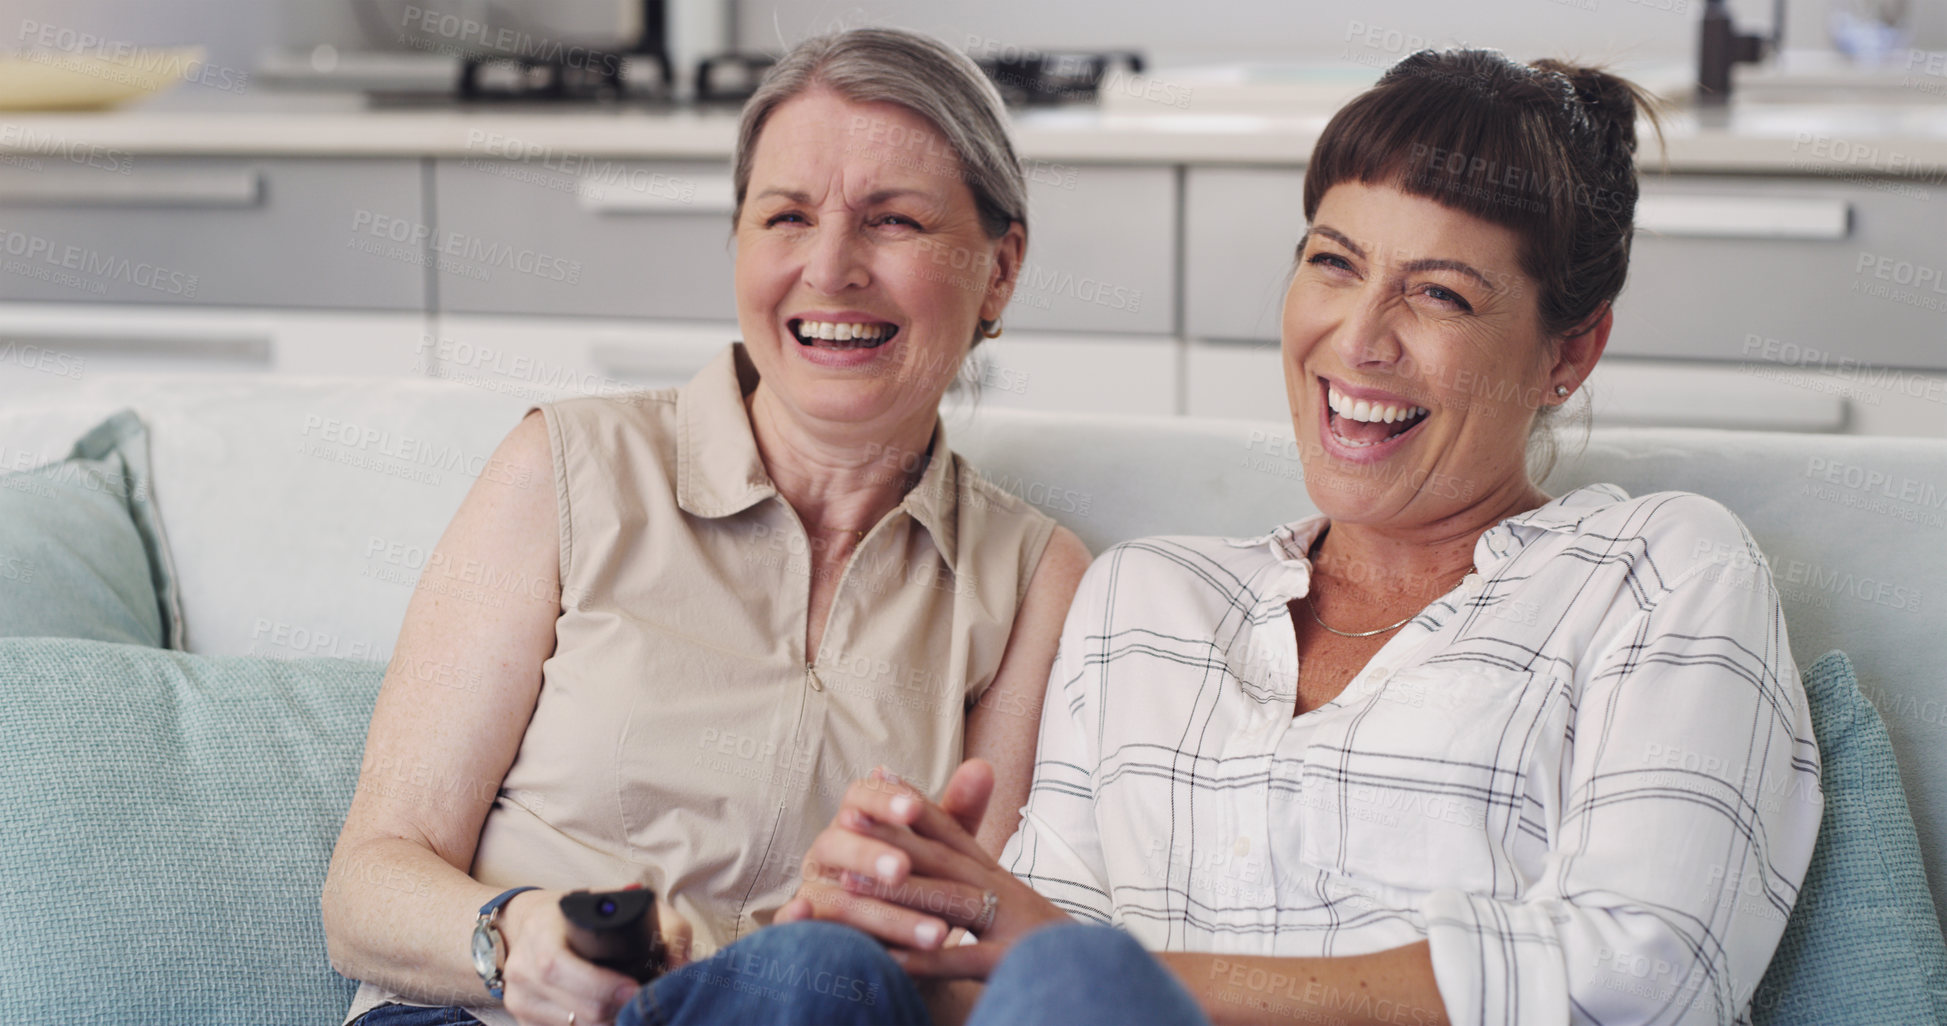 Buy stock photo Shot of s mother and daughter enjoying a TV show together